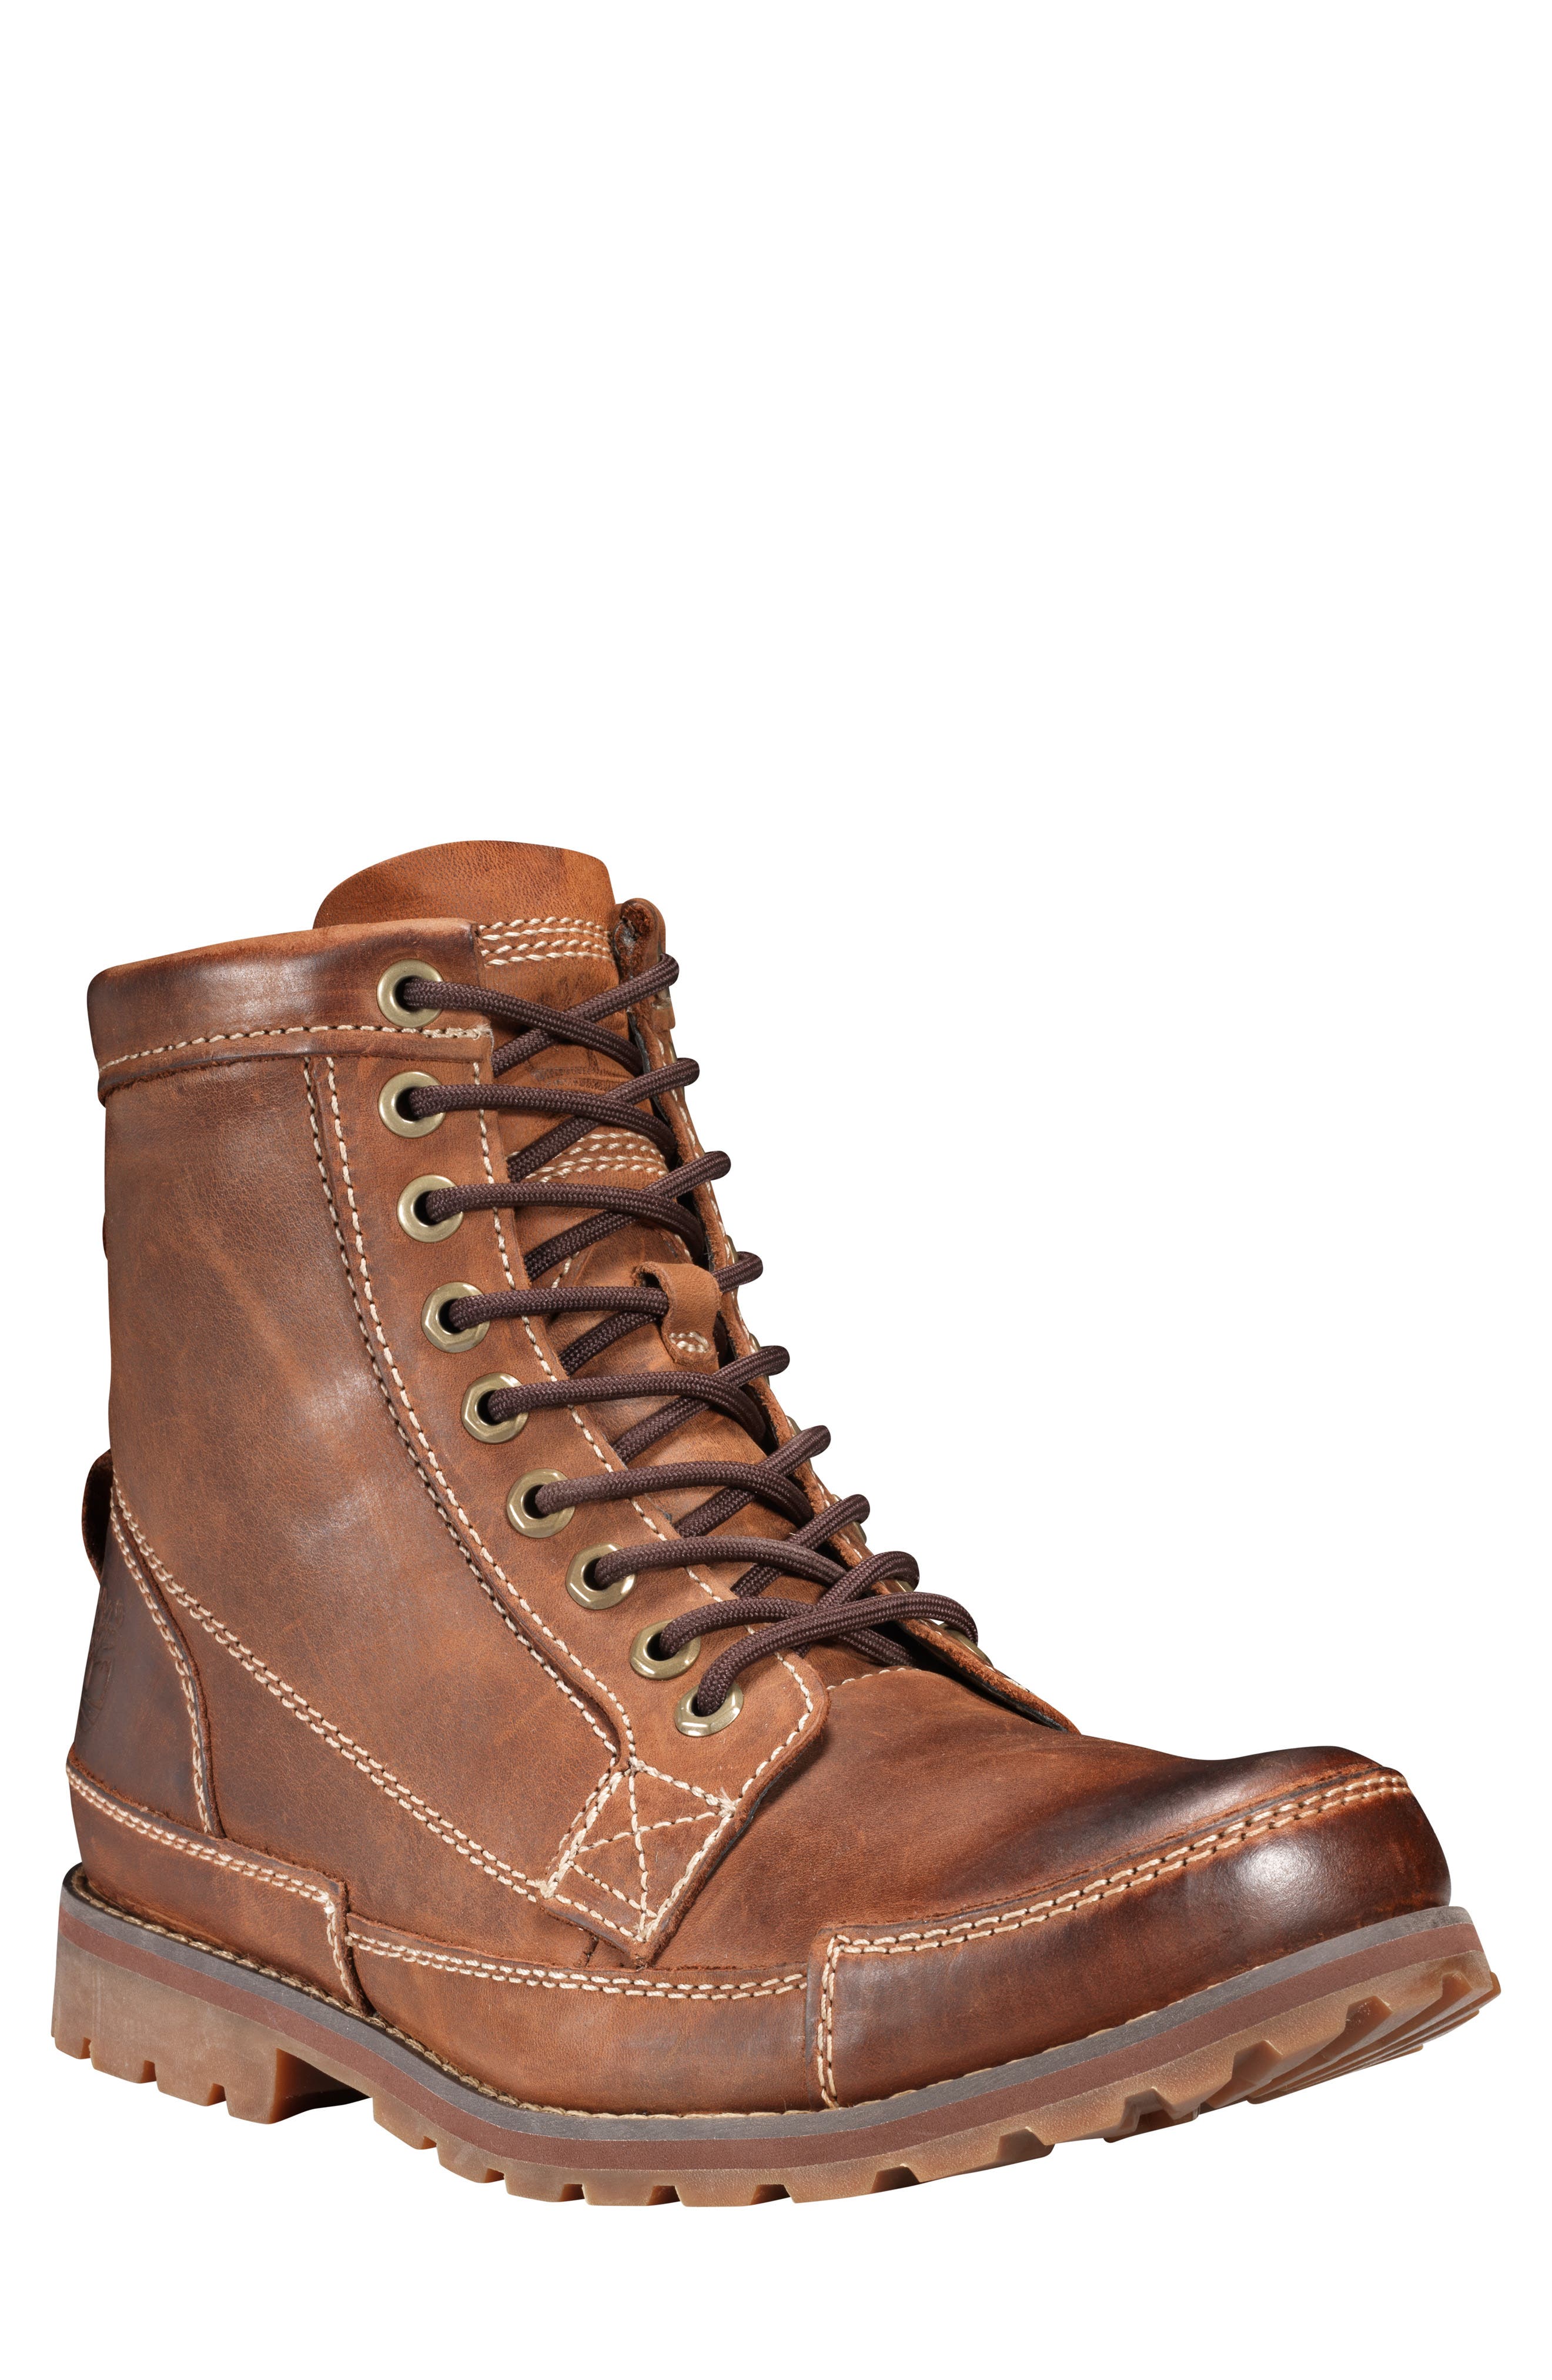 Mens Rugged Boots | Nordstrom